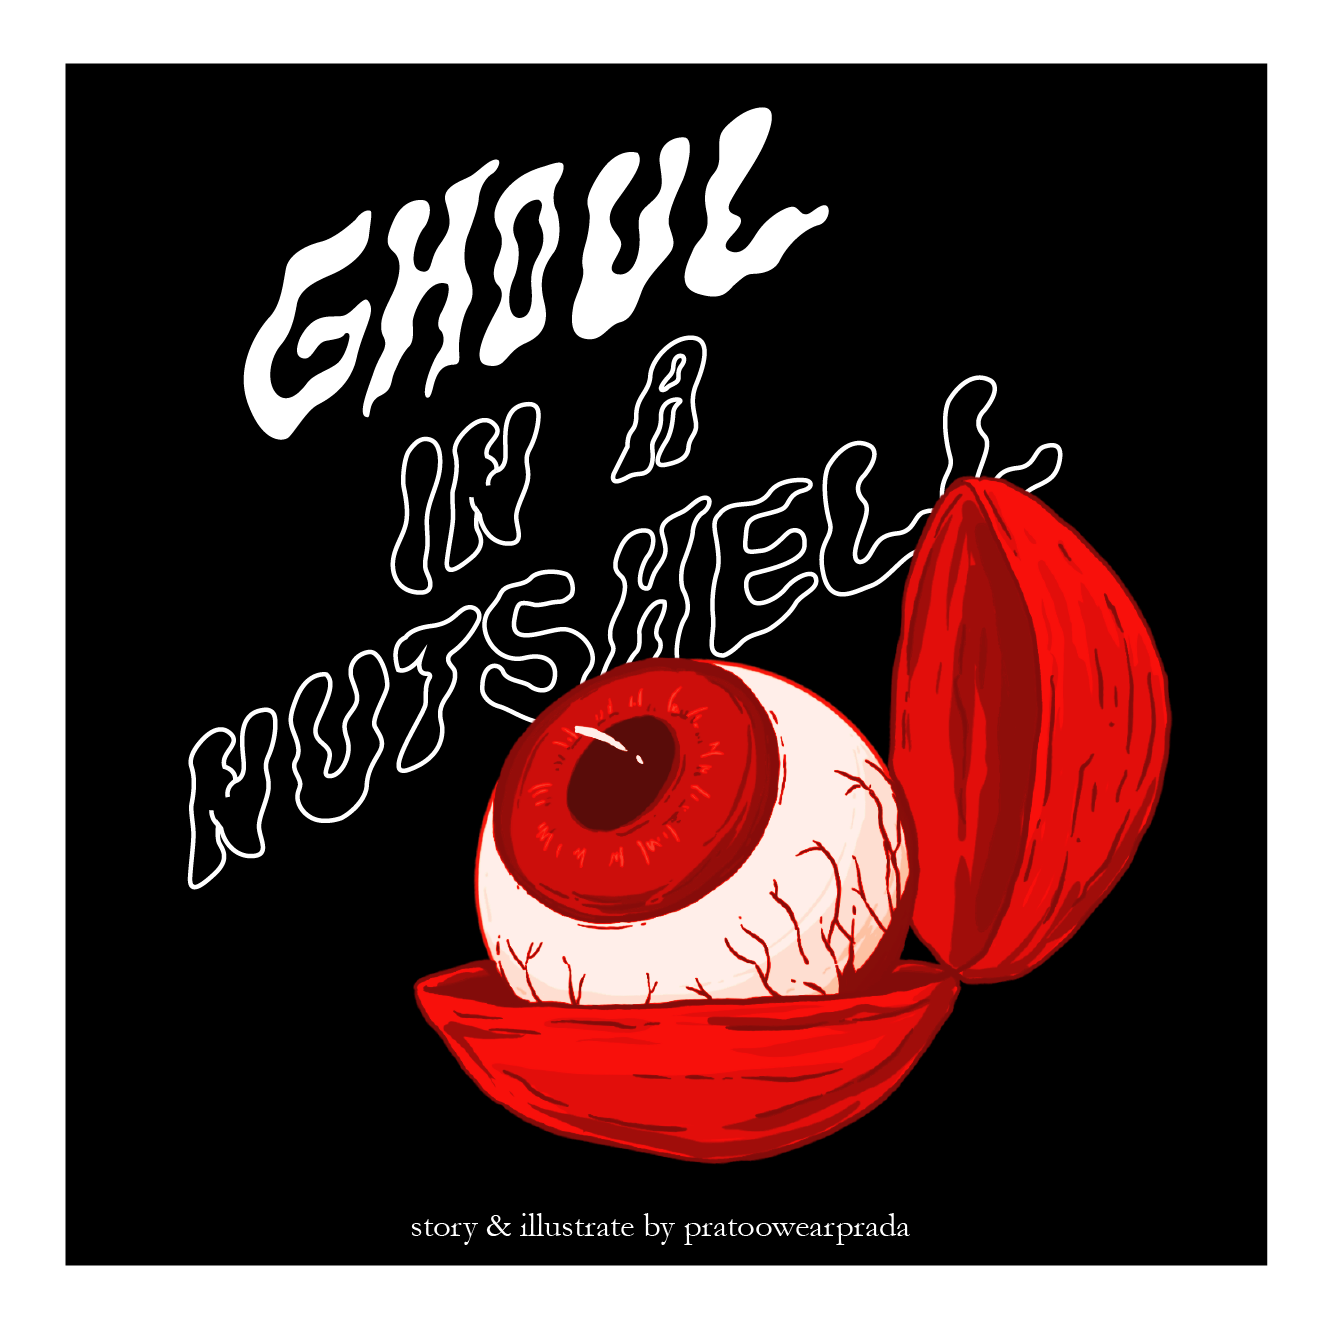 GHOUL INANUTSHELL COVER